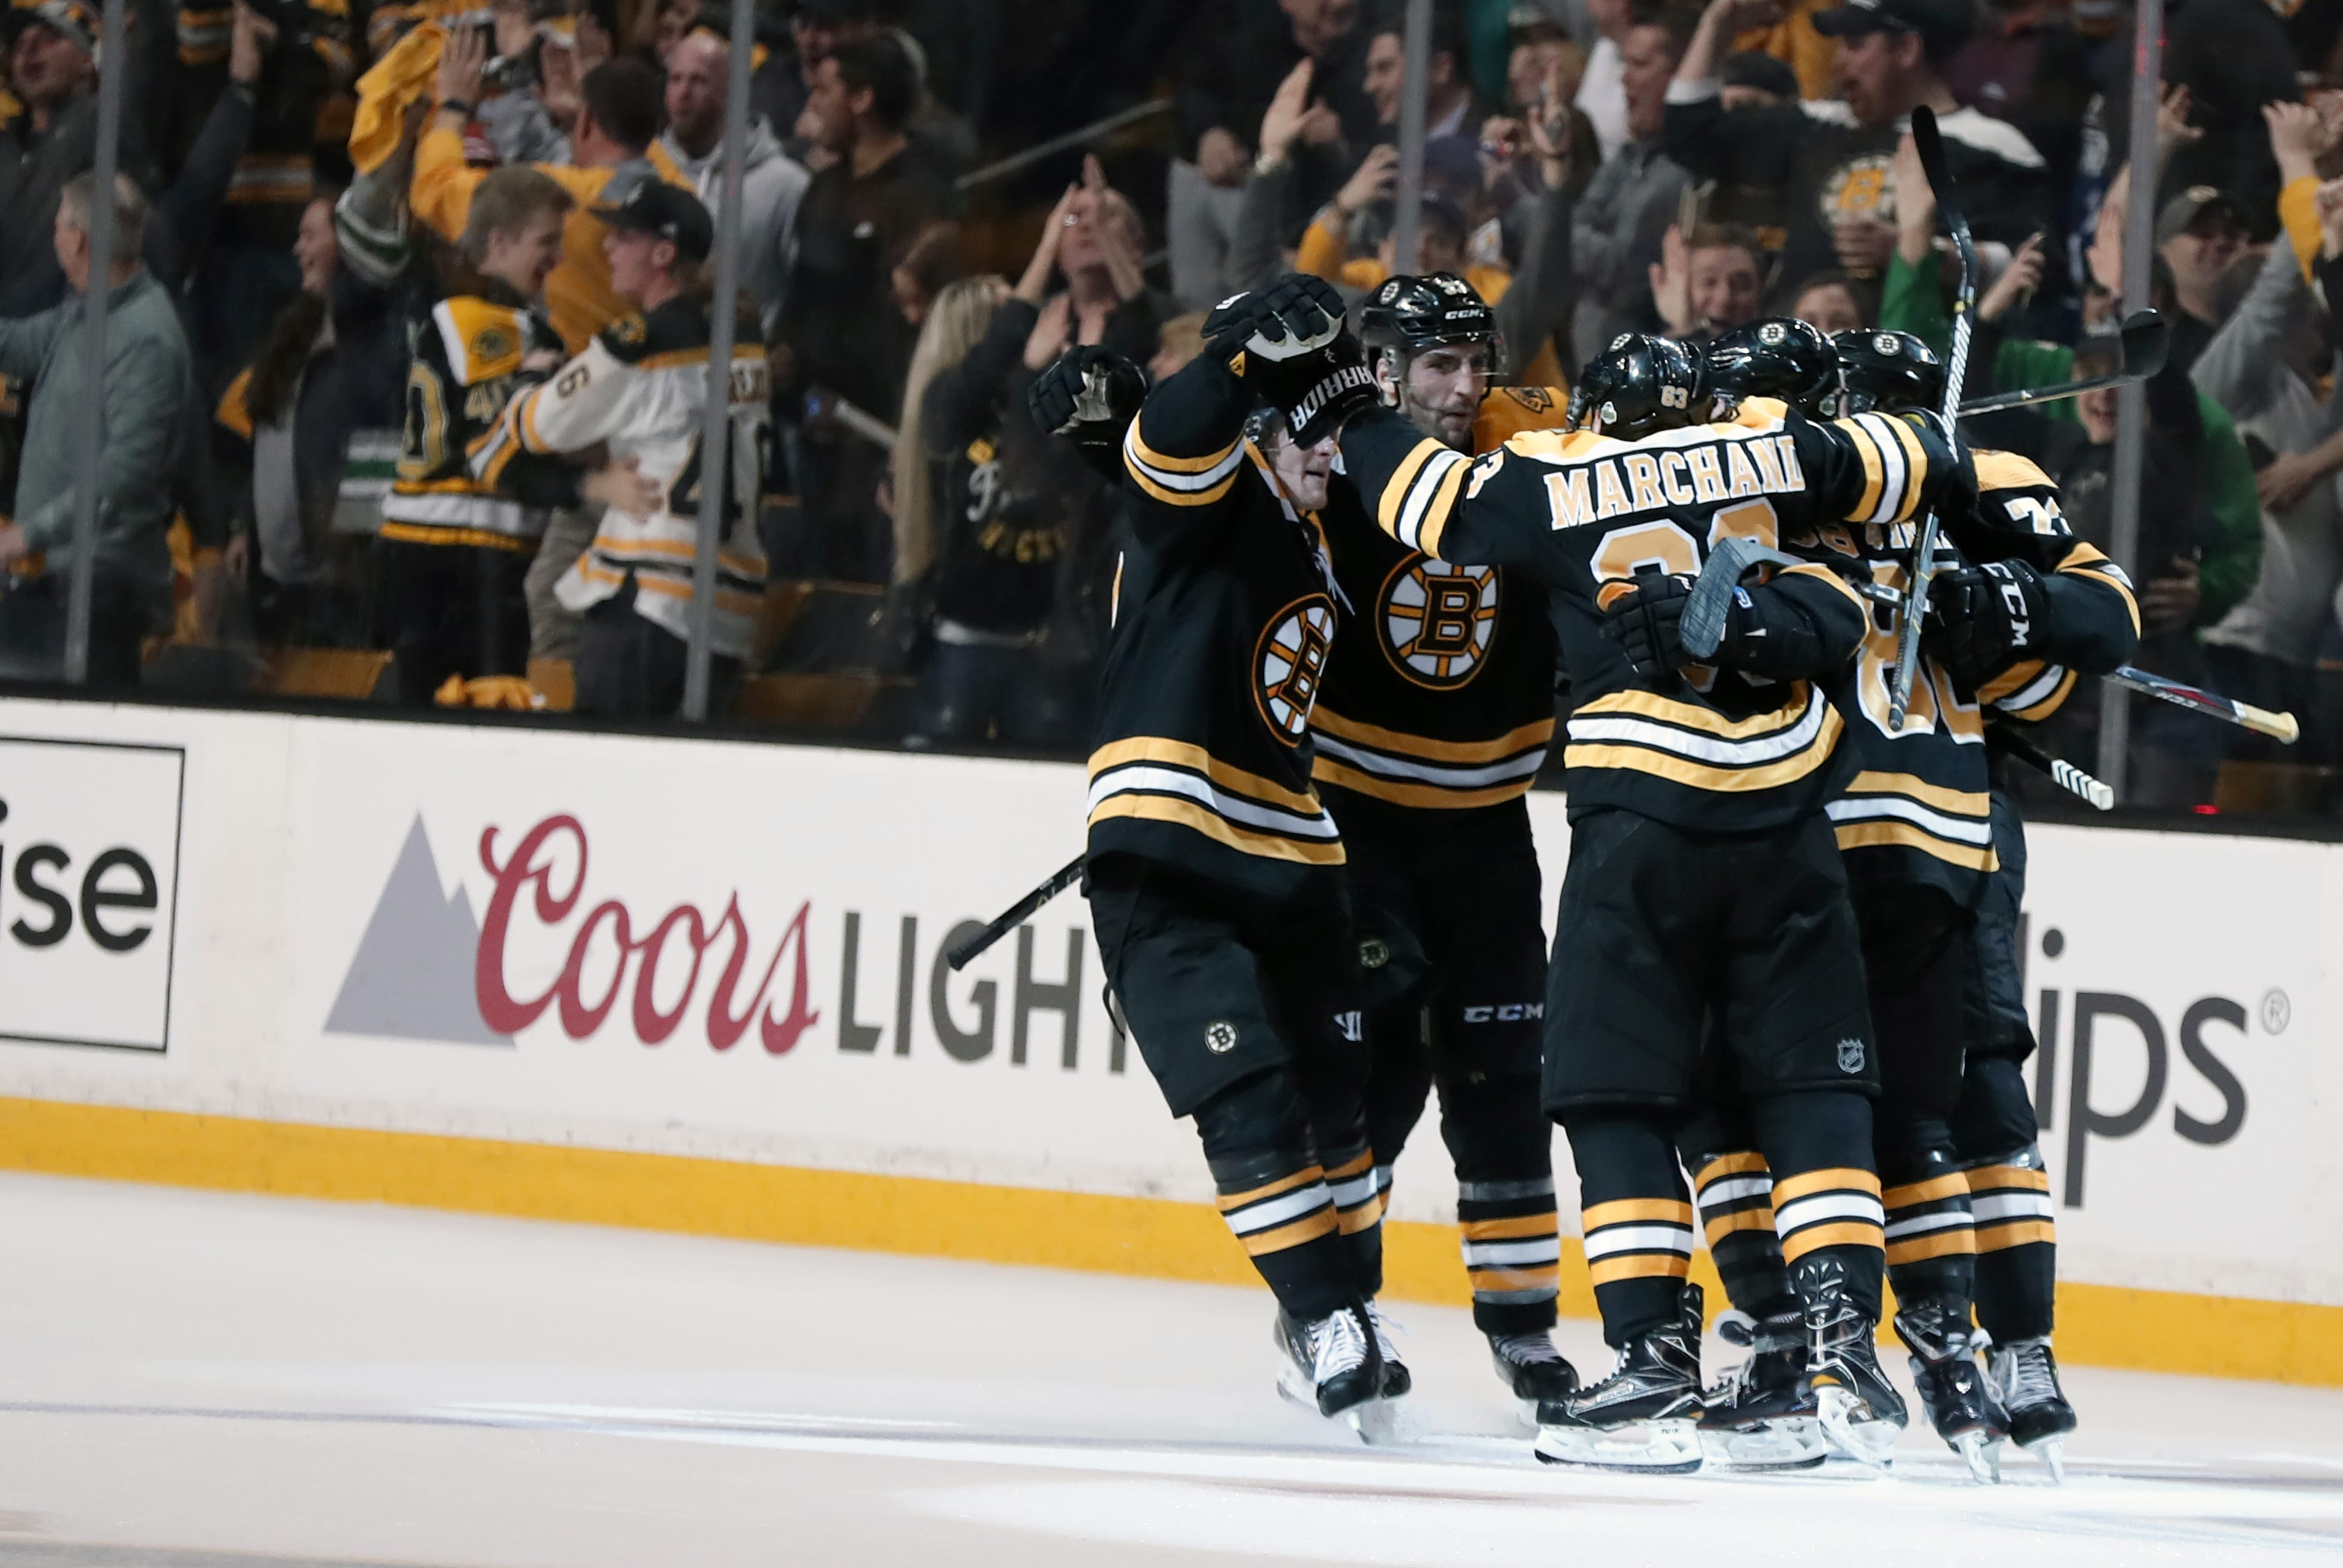 Boston Bruins Home Schedule 2019-20 & Seating Chart | Ticketmaster Blog